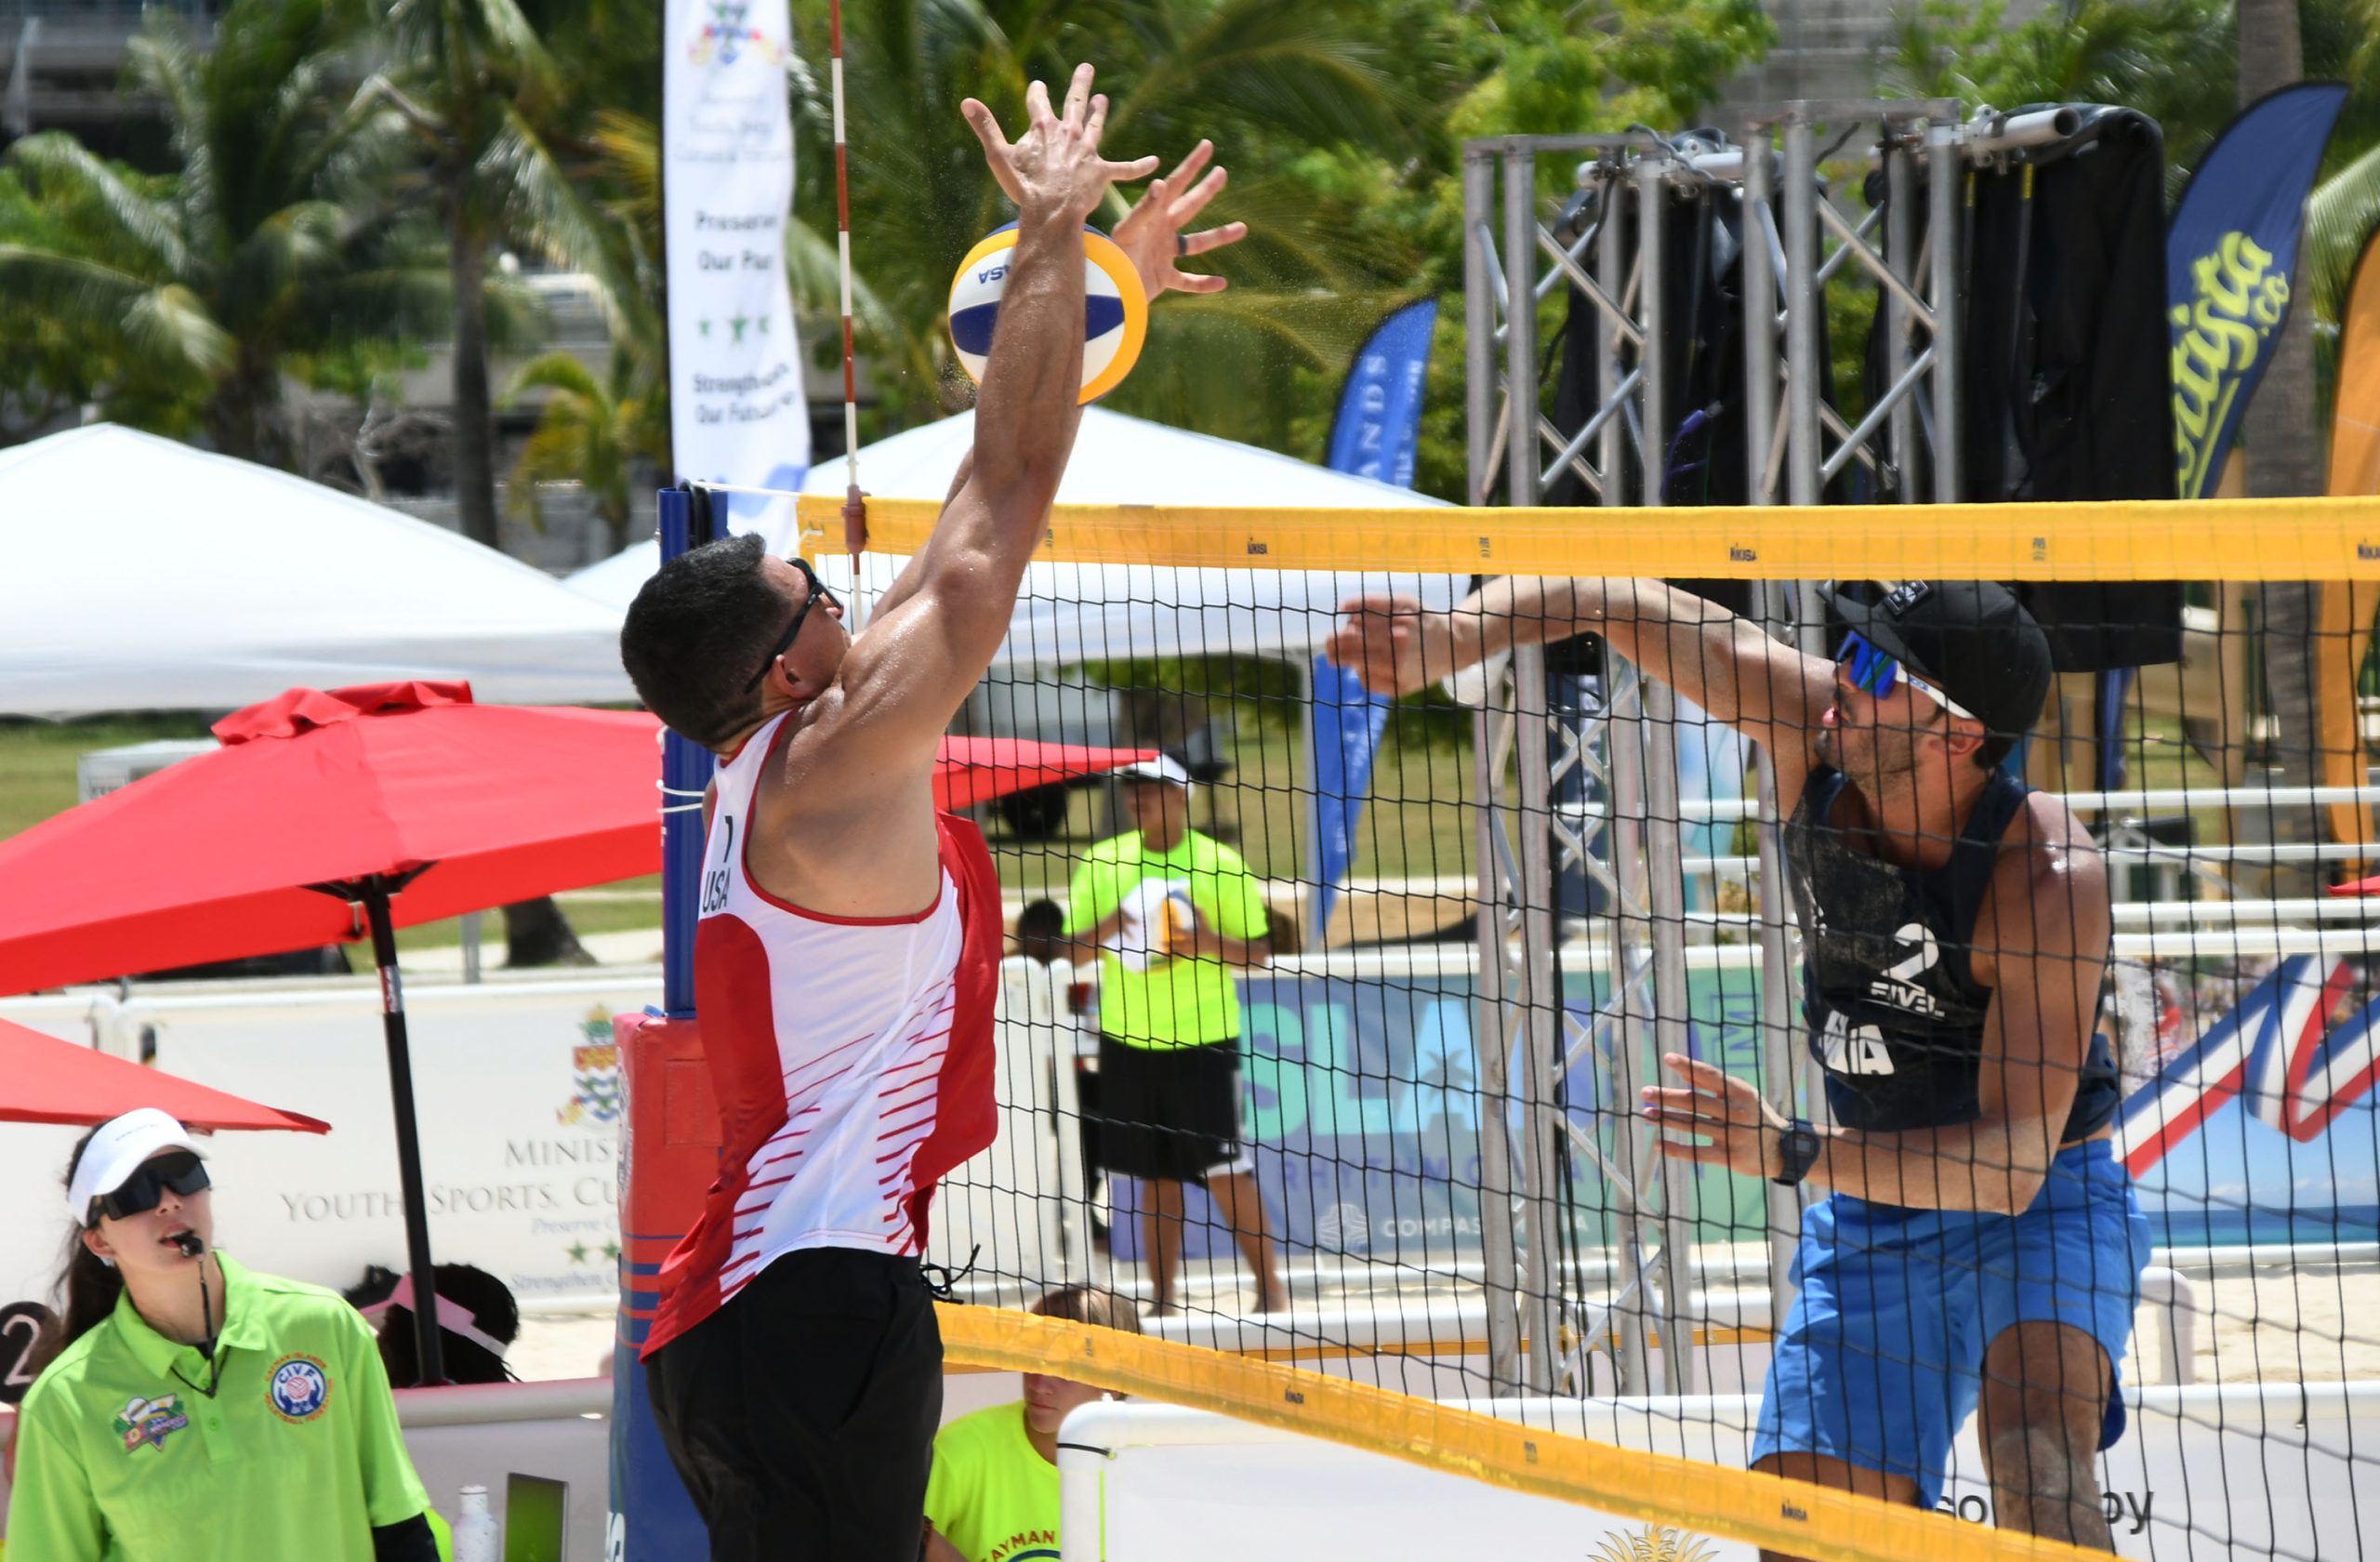 Seven teams undefeated on day one at Cayman Islands men’s competition